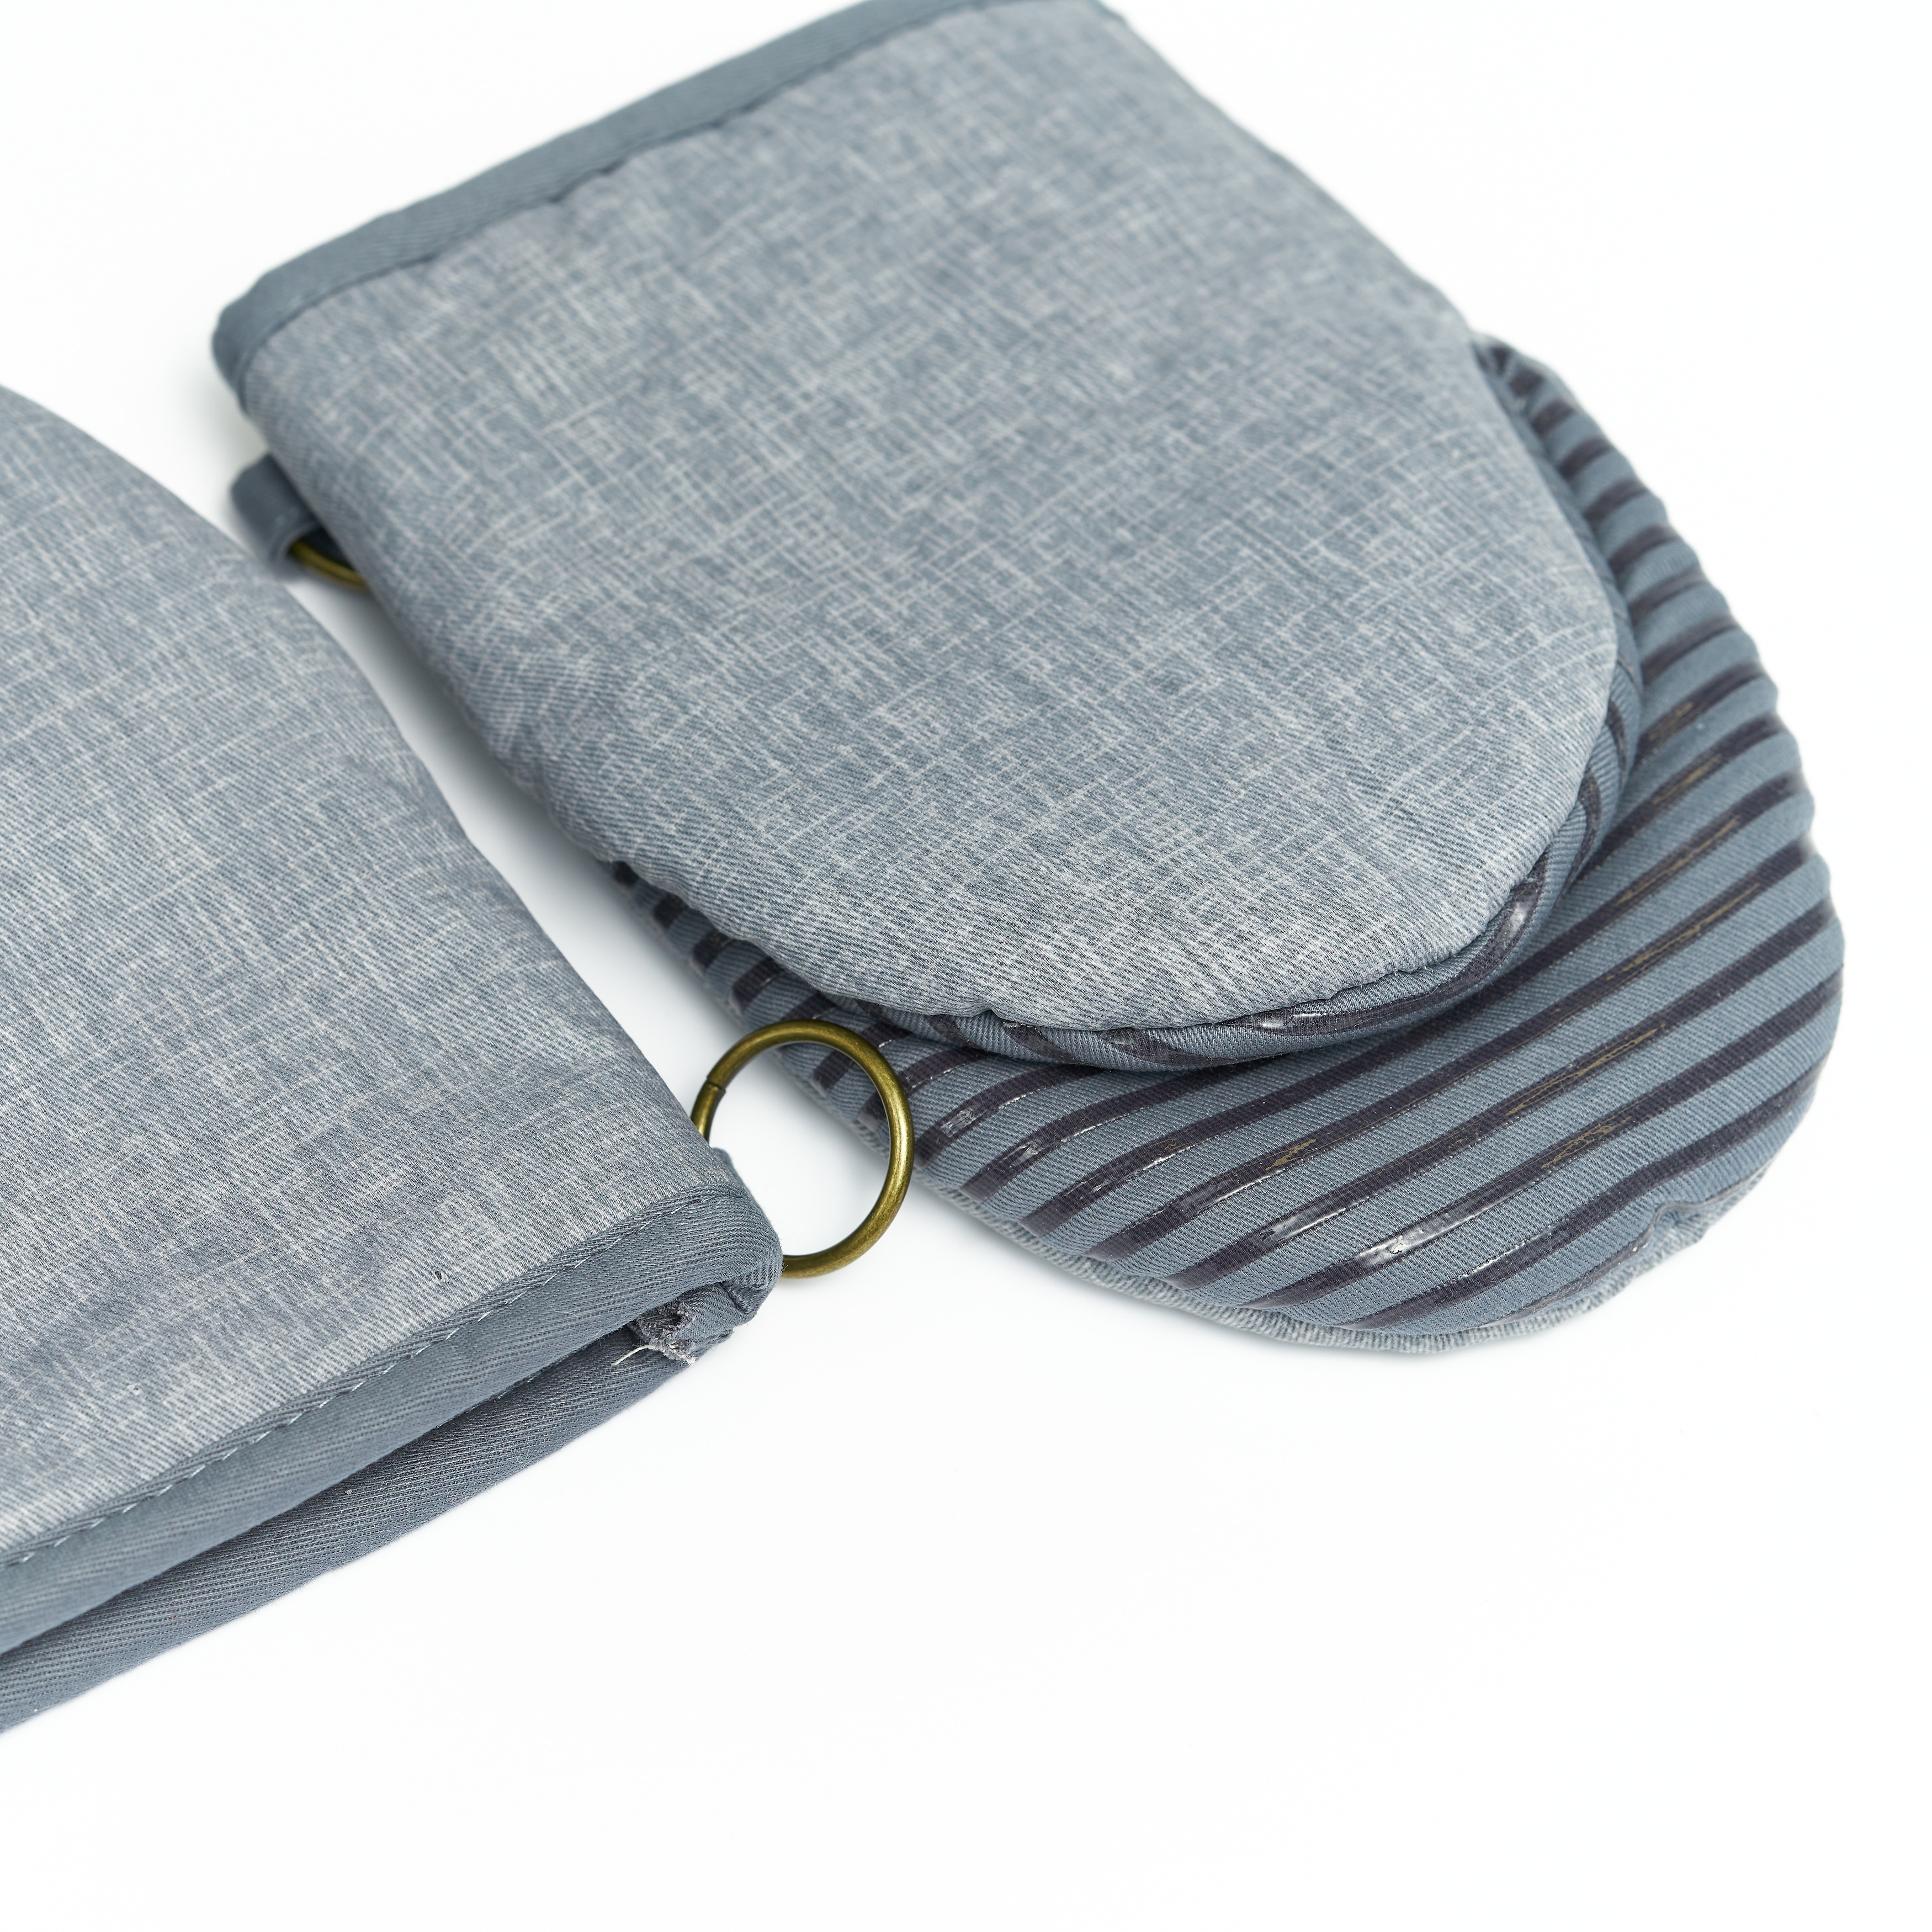 2-Piece Speckle Silicone Oven Mitt Set, Grey, Sold by at Home